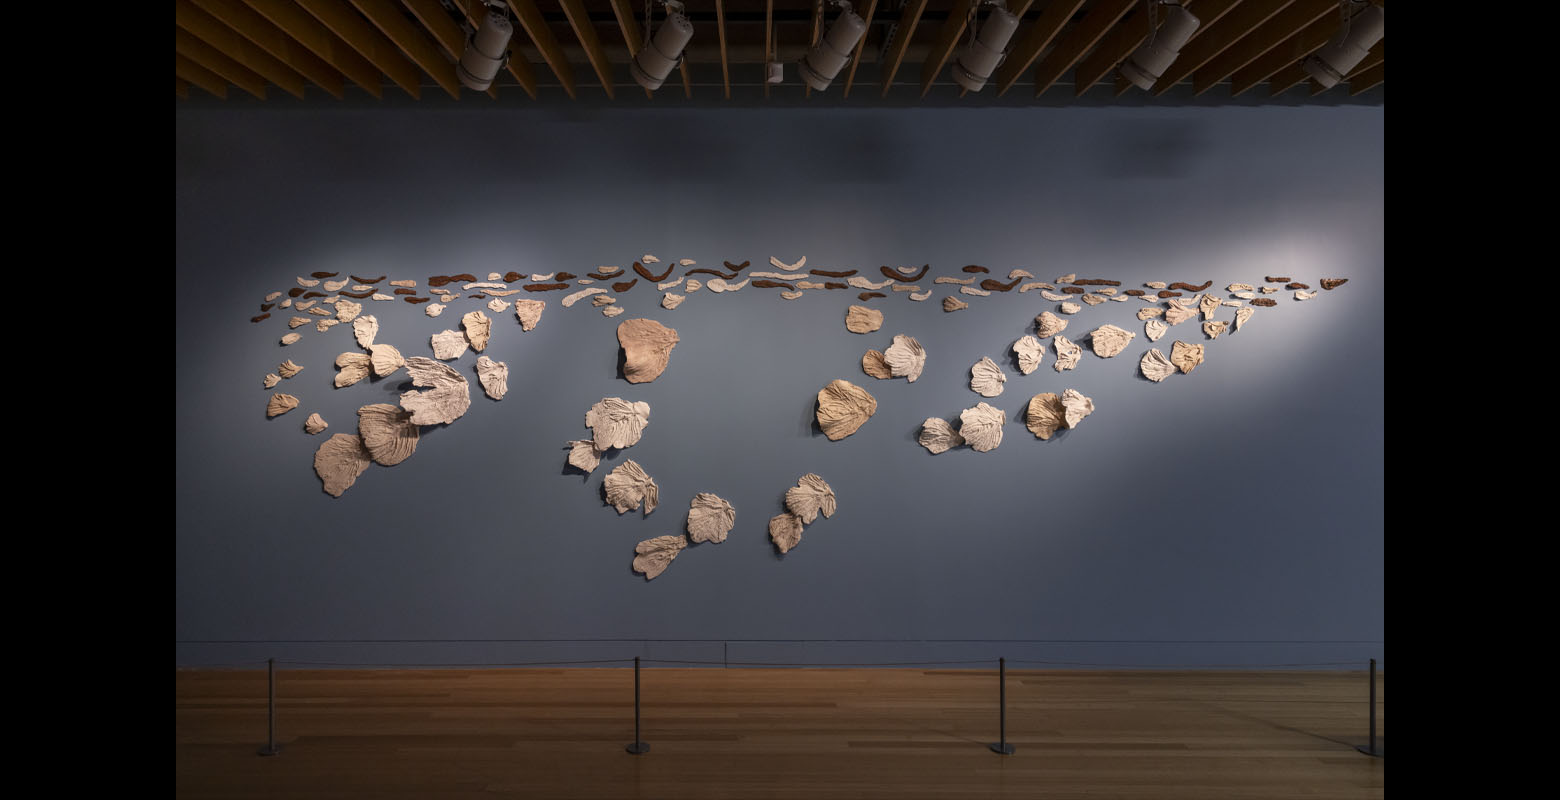 An array of ceramics of all sizes resembling leaves, assembled together on a wall in a pattern that loosely resembles a bird in flight